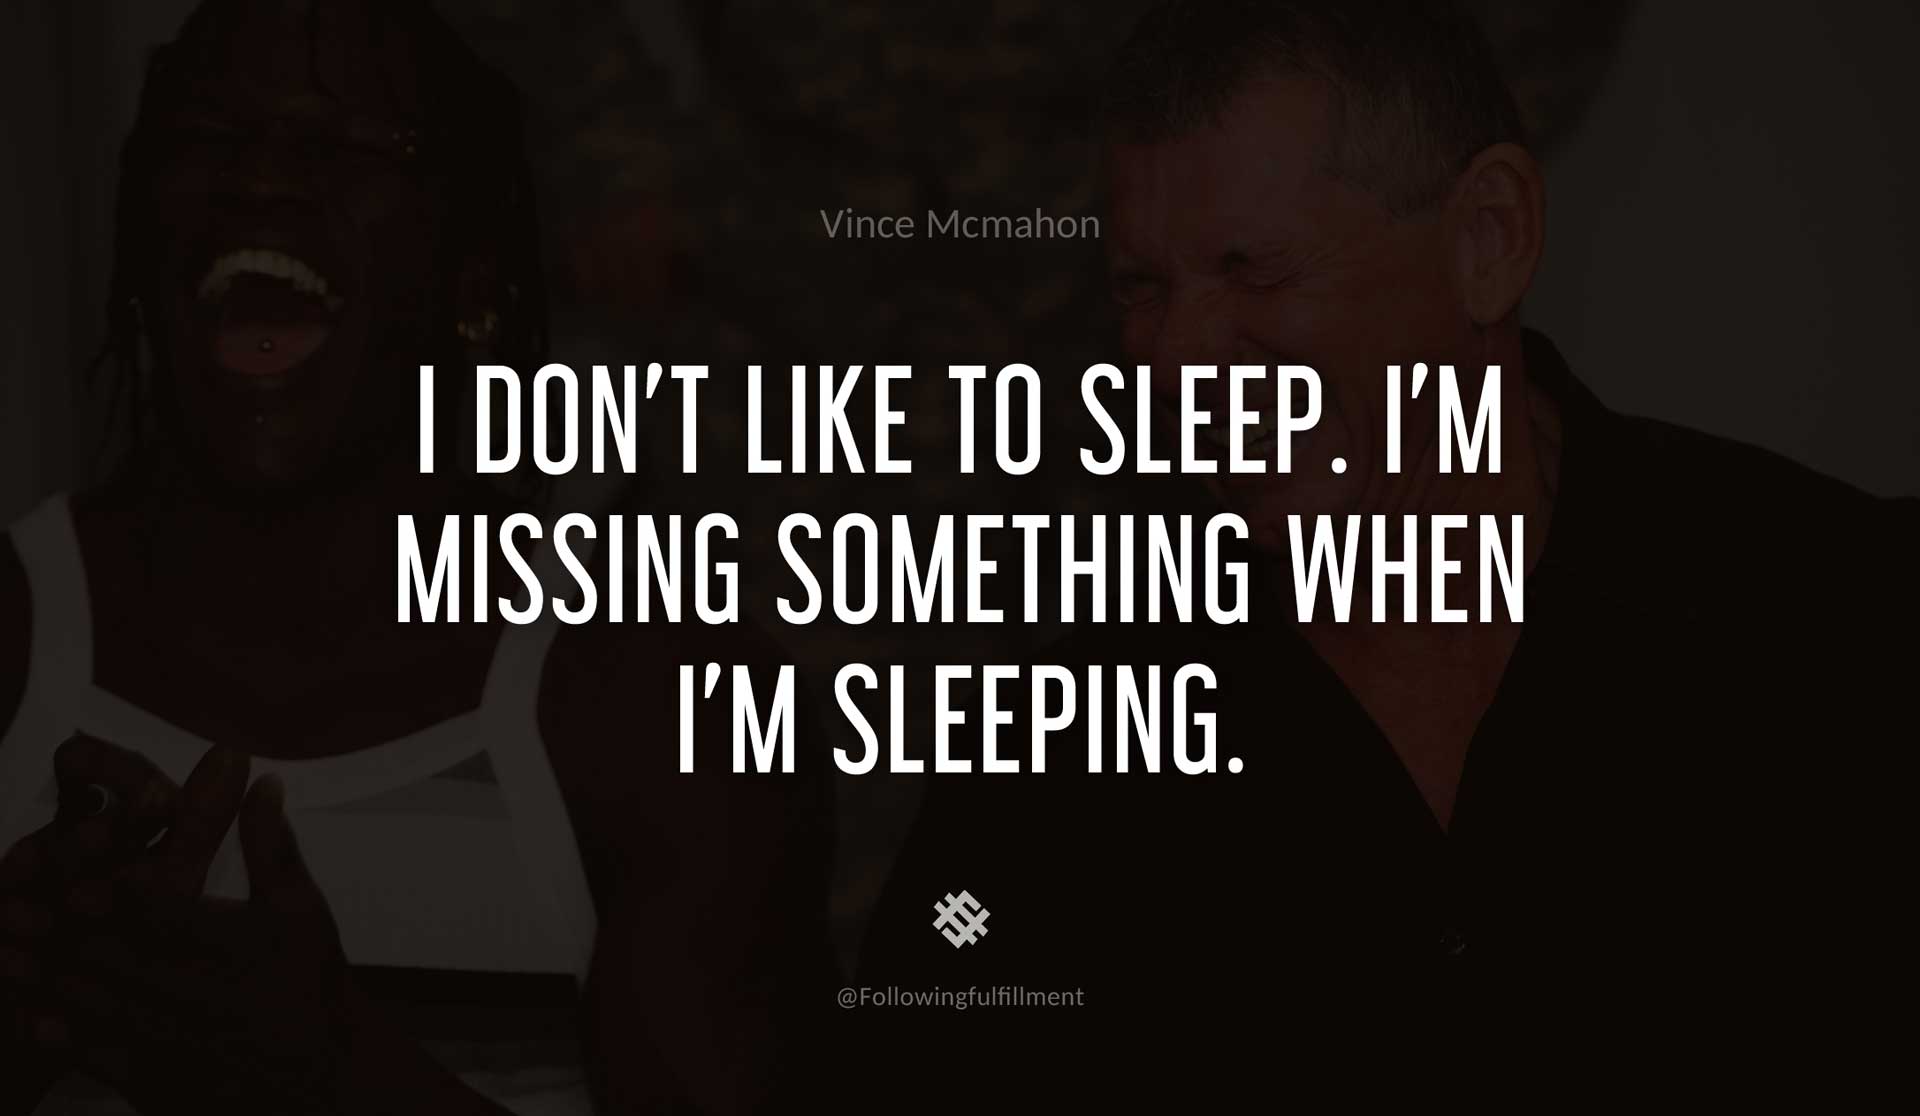 I-don't-like-to-sleep.-I'm-missing-something-when-I'm-sleeping.-VINCE-MCMAHON-Quote.jpg